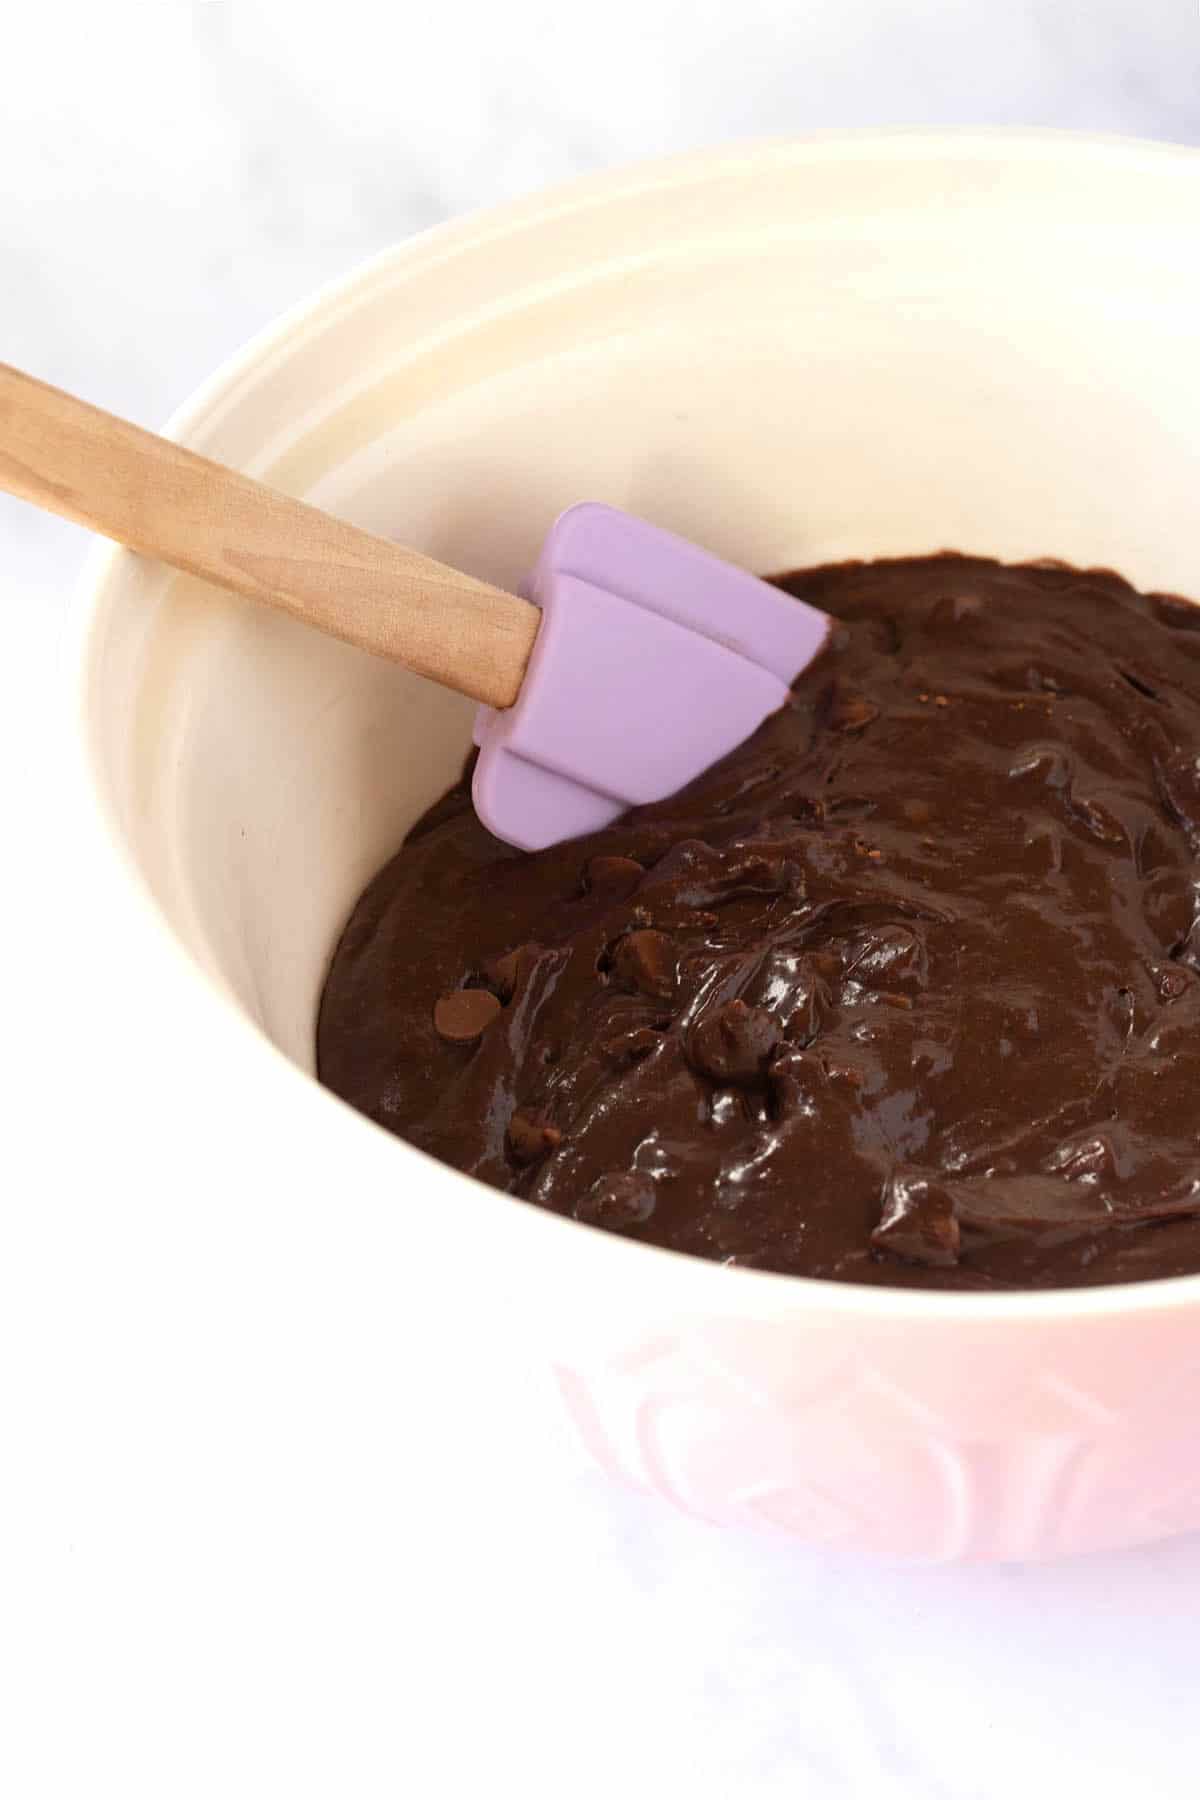 A large mixing bowl filled with gooey chocolate brownie batter and a purple spatula. 